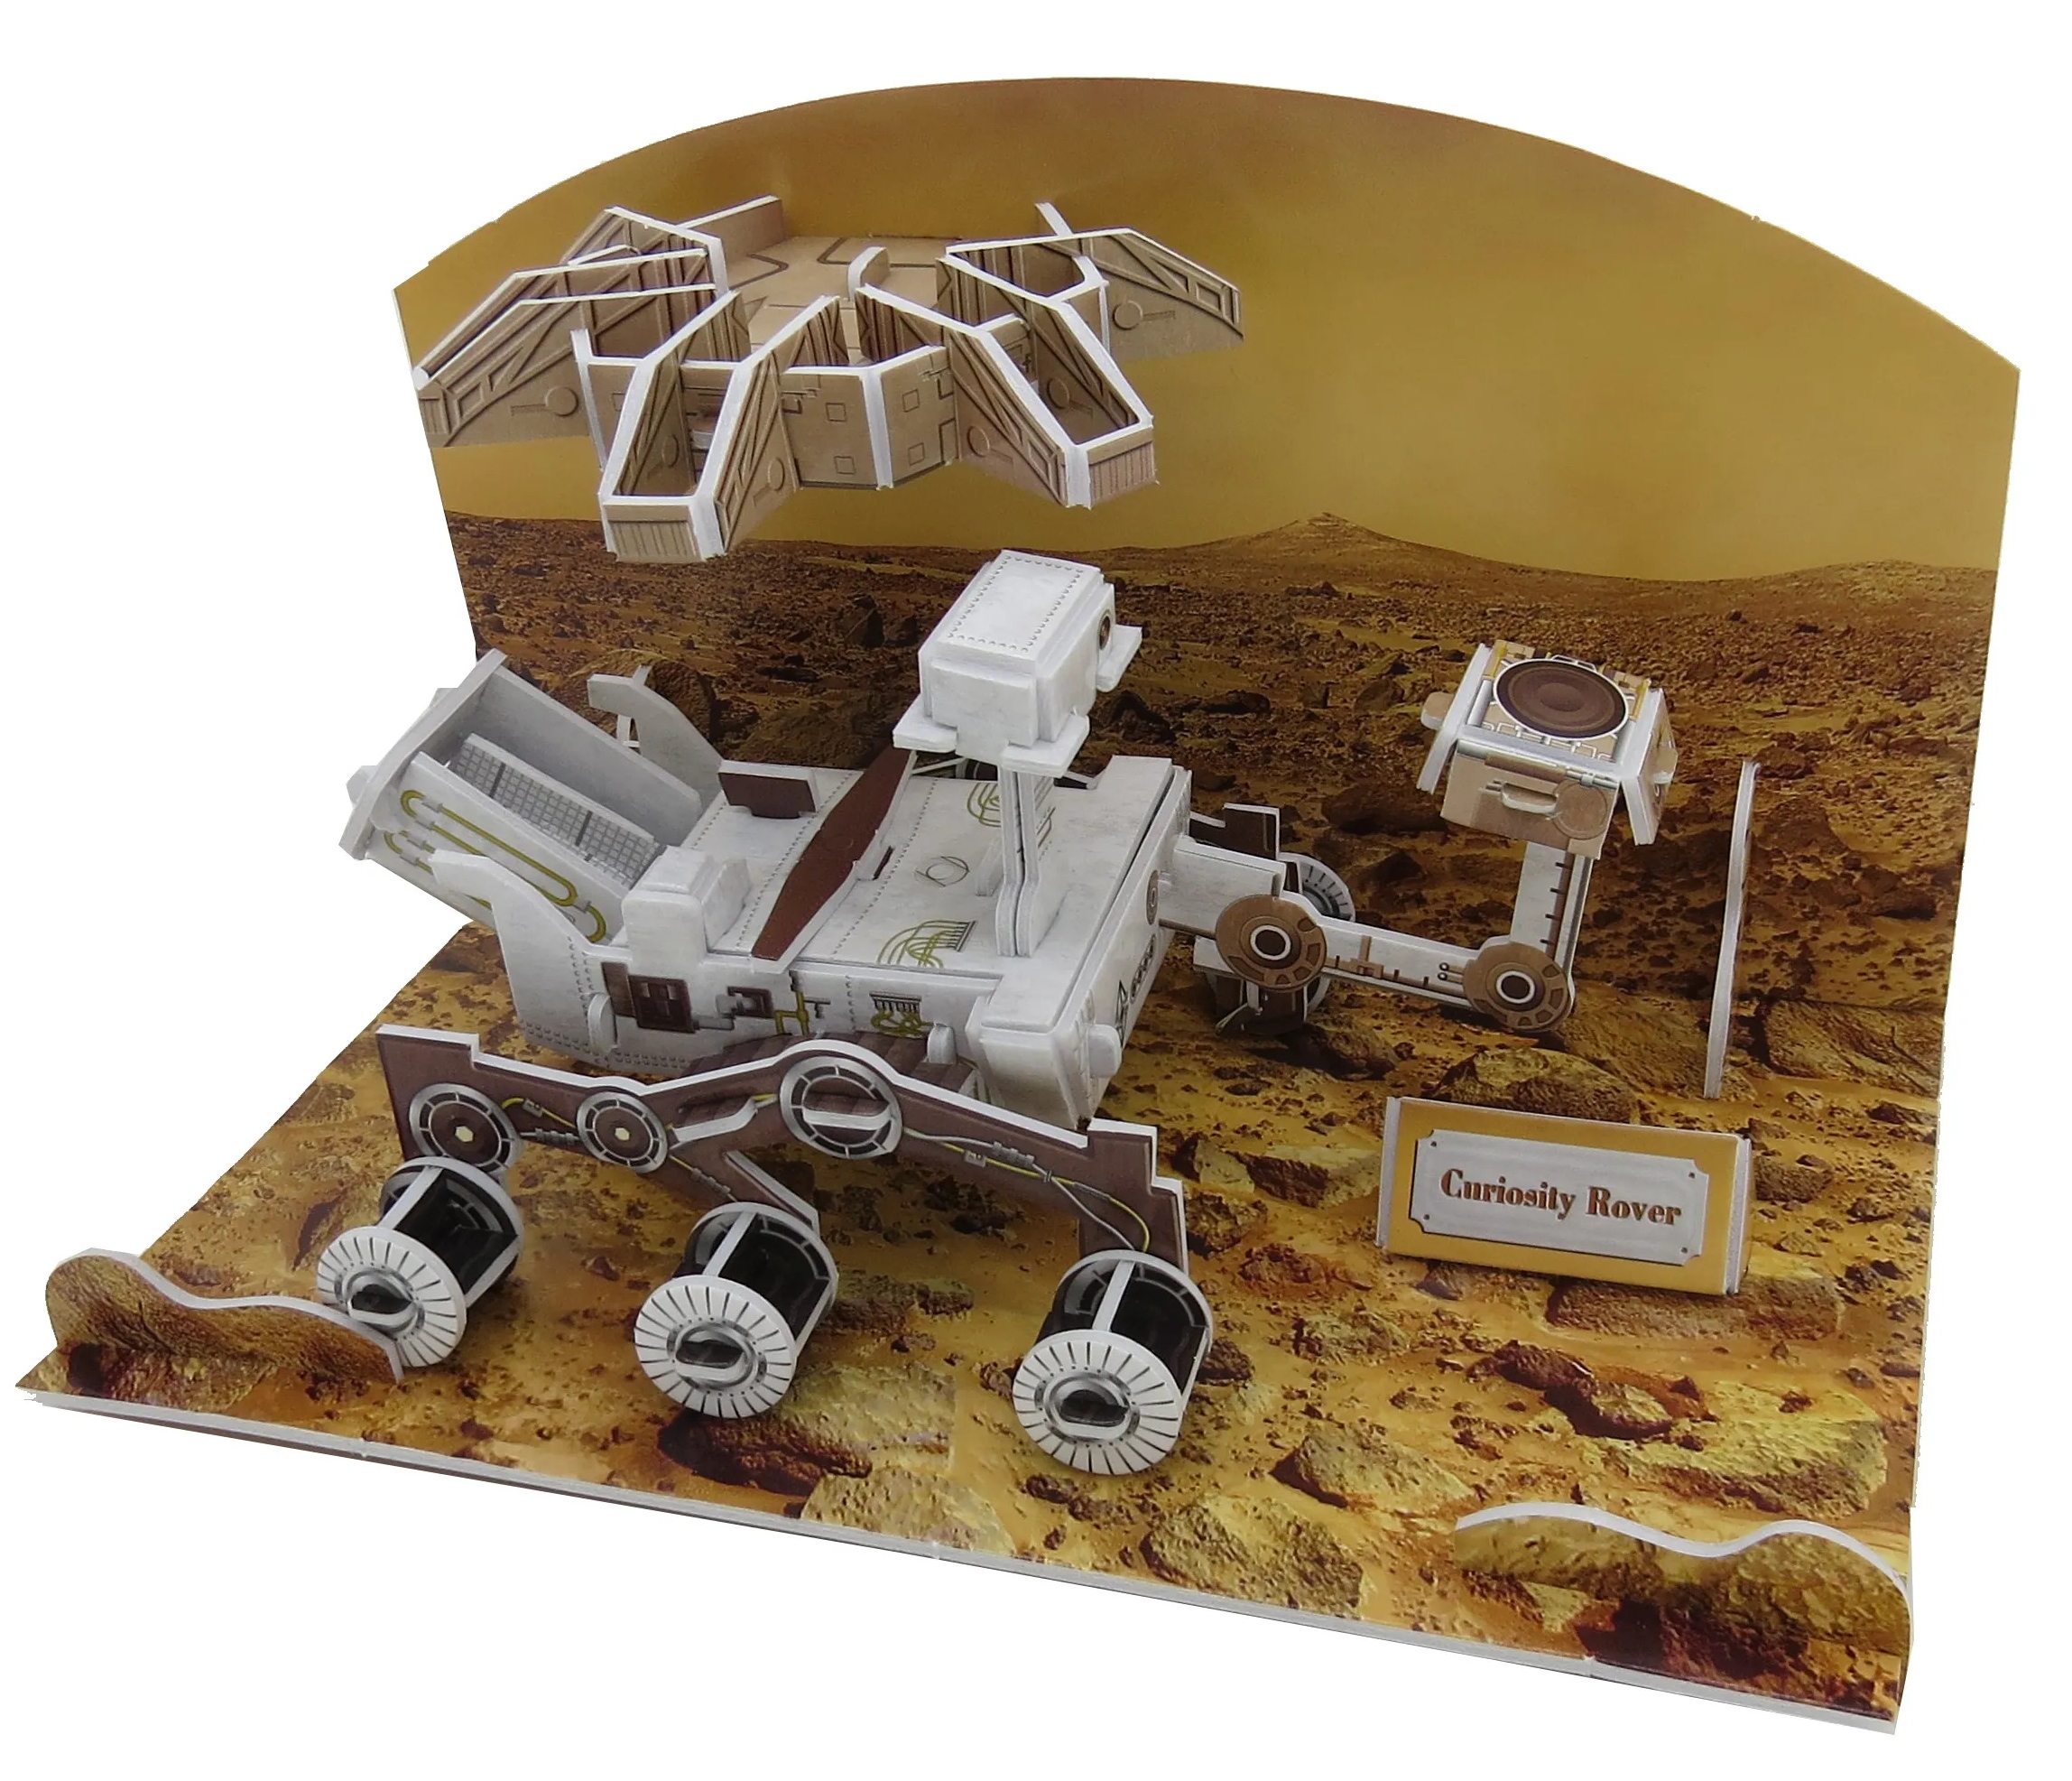 A curiosity Rover model kit (New in box), NASA Expedition 46 poster,